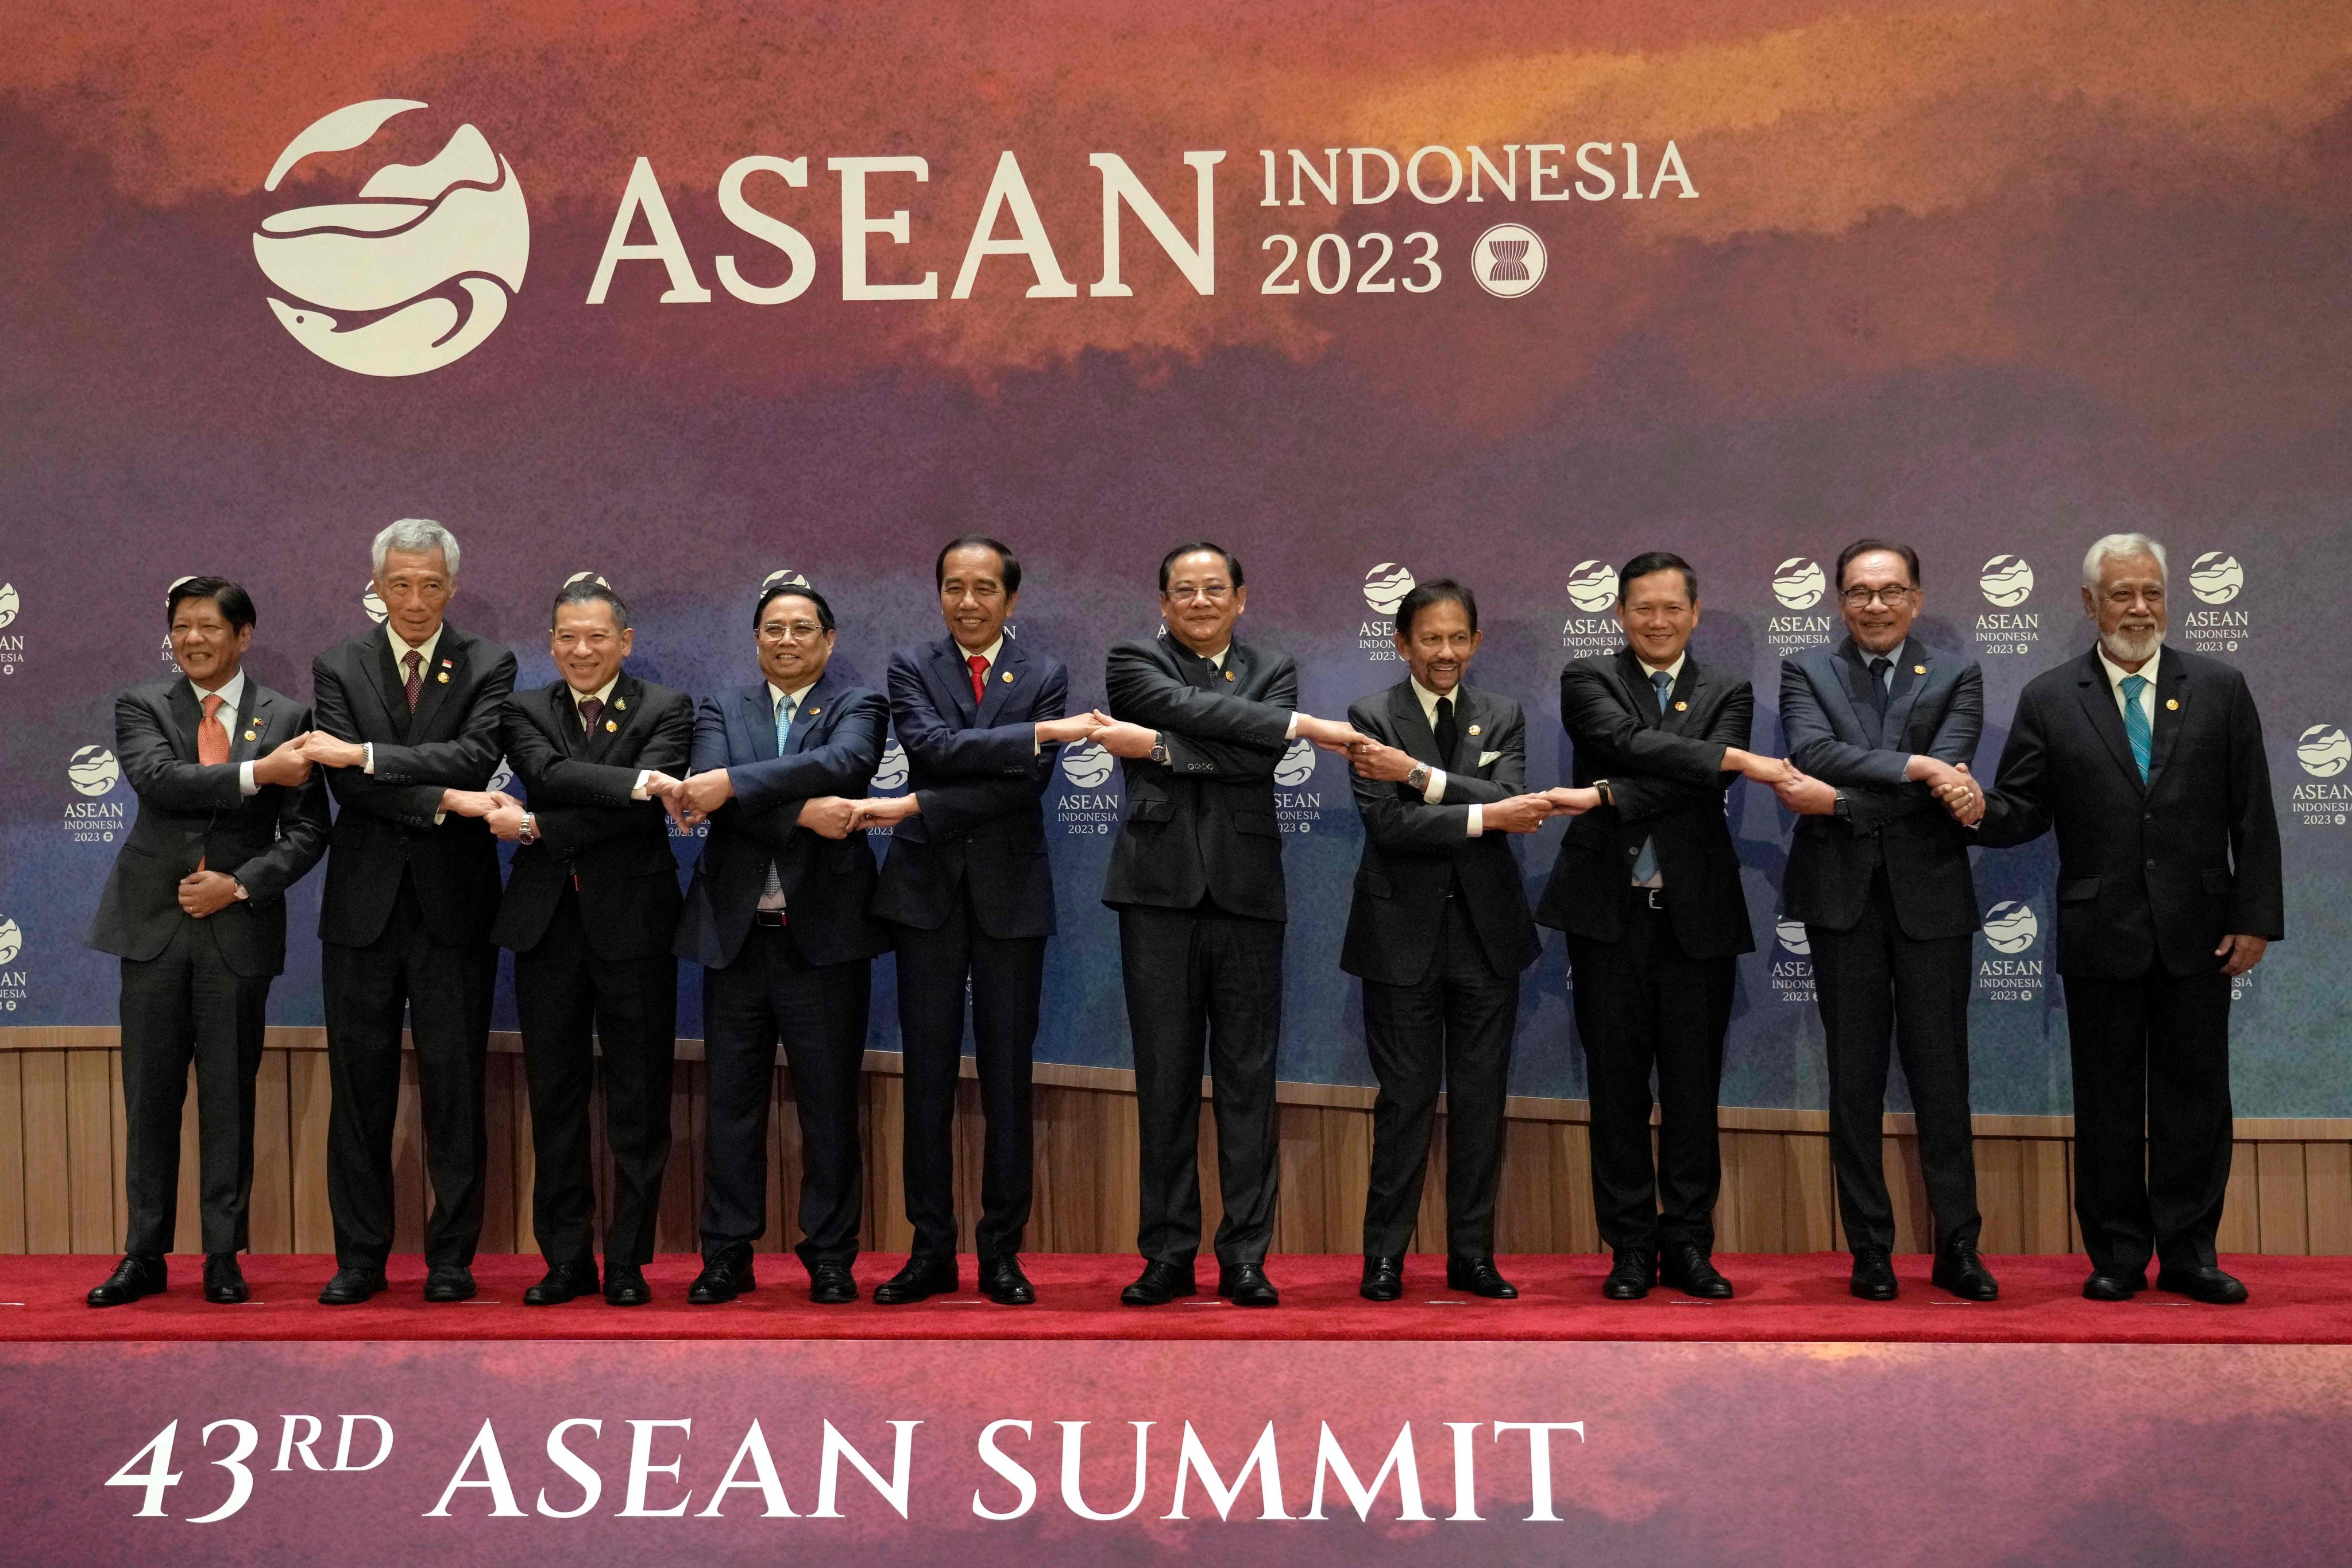 The leaders of Asean countries join hands during the 43rd Asean Summit in Jakarta, Indonesia, on September 5, 2023. Photo: AFP